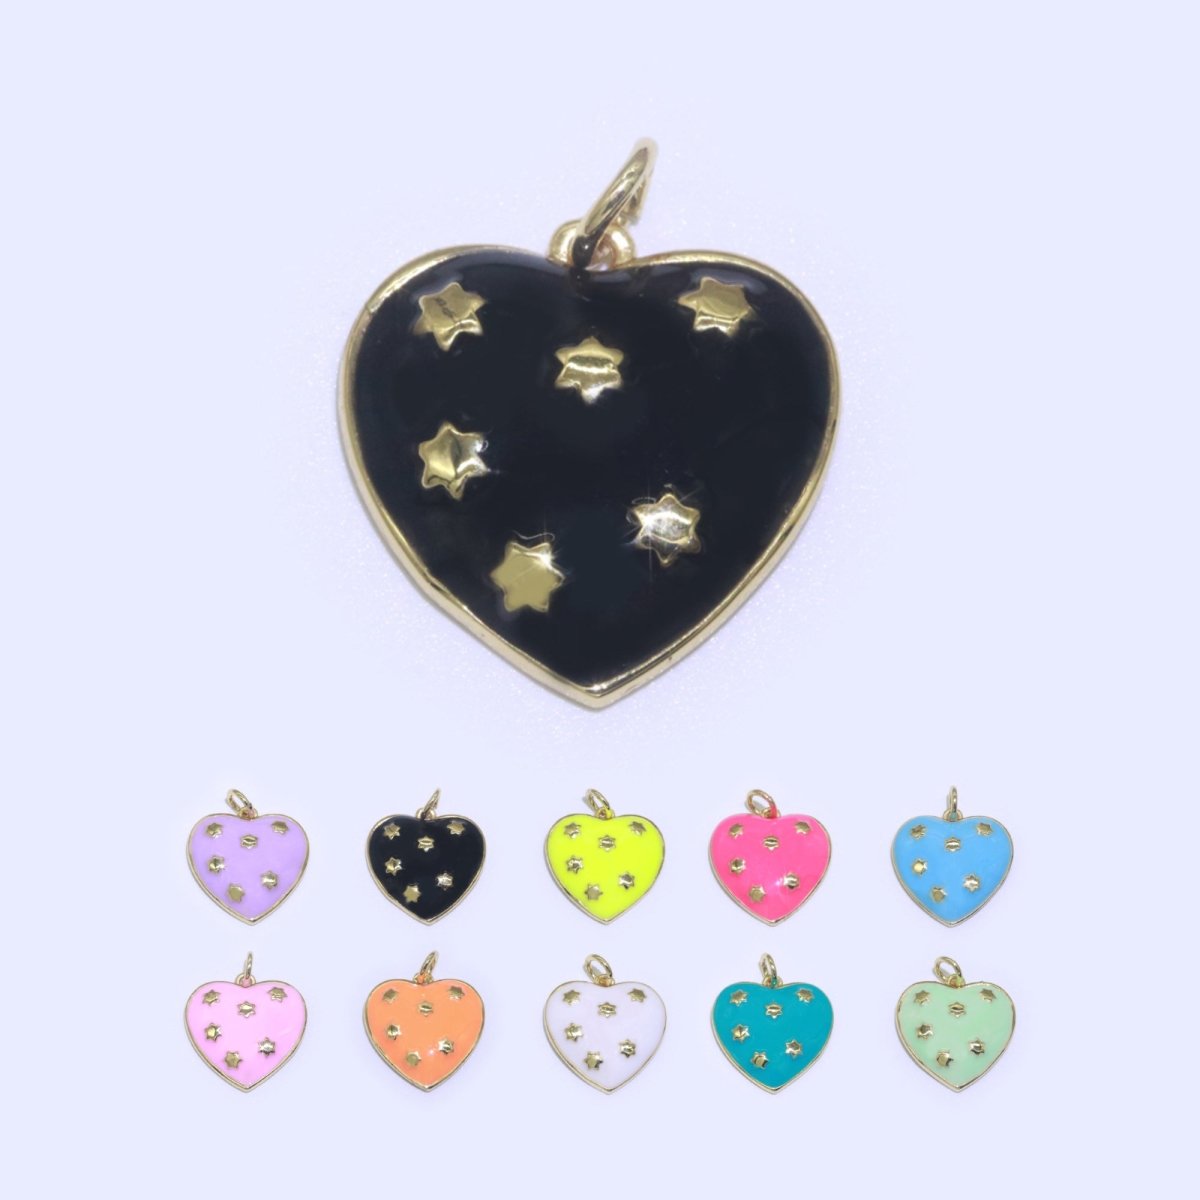 14K Gold Filled Colorful Enamel Heart Star Pendant Charm For Wholesale Pendants and Charms Jewelry Making Craft Supplies M-315-M-324 - DLUXCA